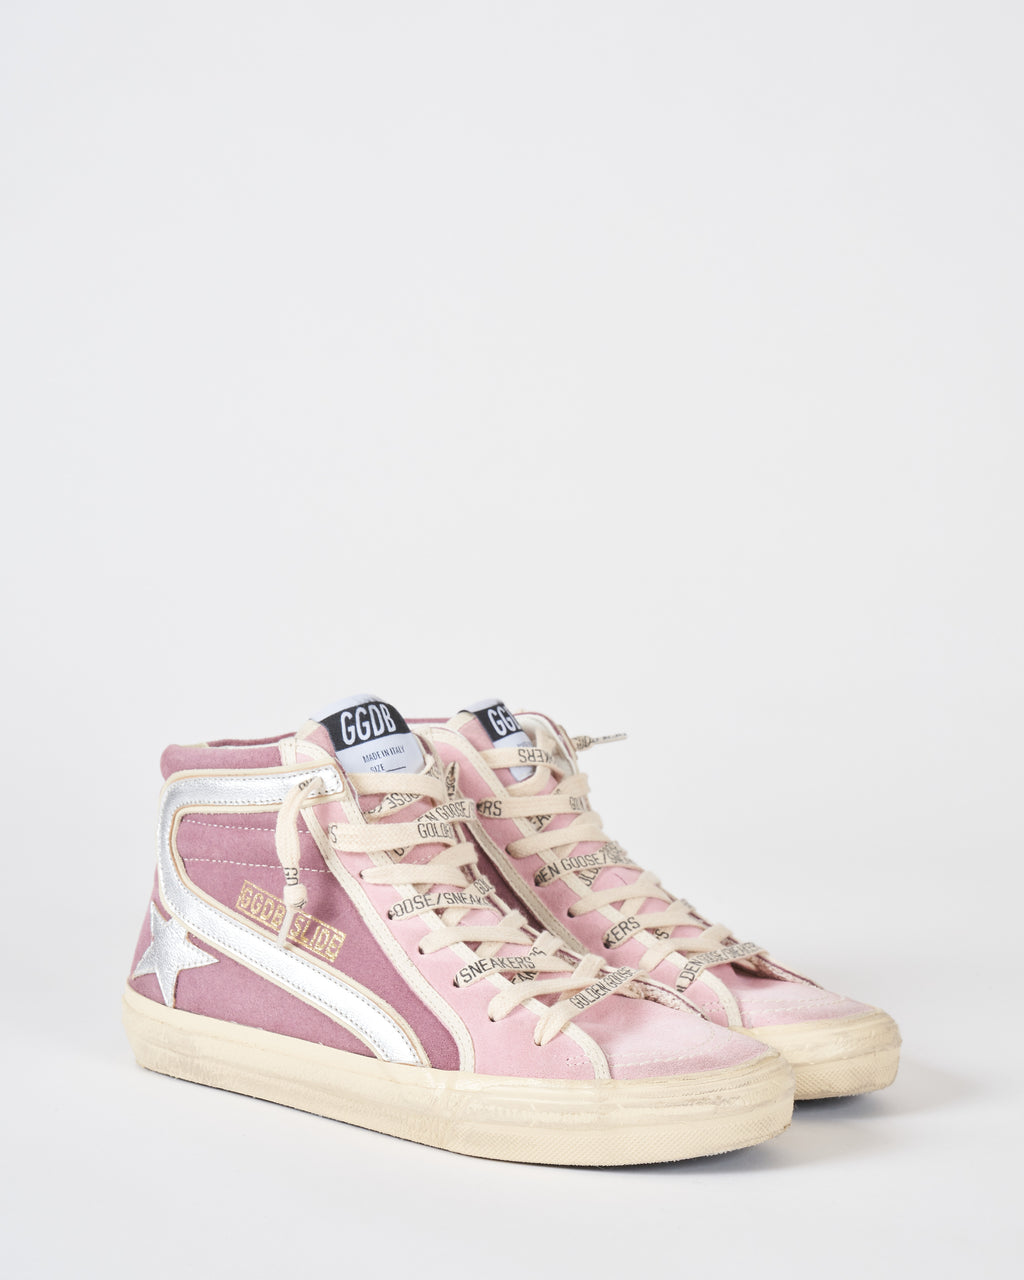 Golden Goose Slide Suede Upper With Trims Laminated Star And Wave Leather  Heel Violet/Silver/Ivory